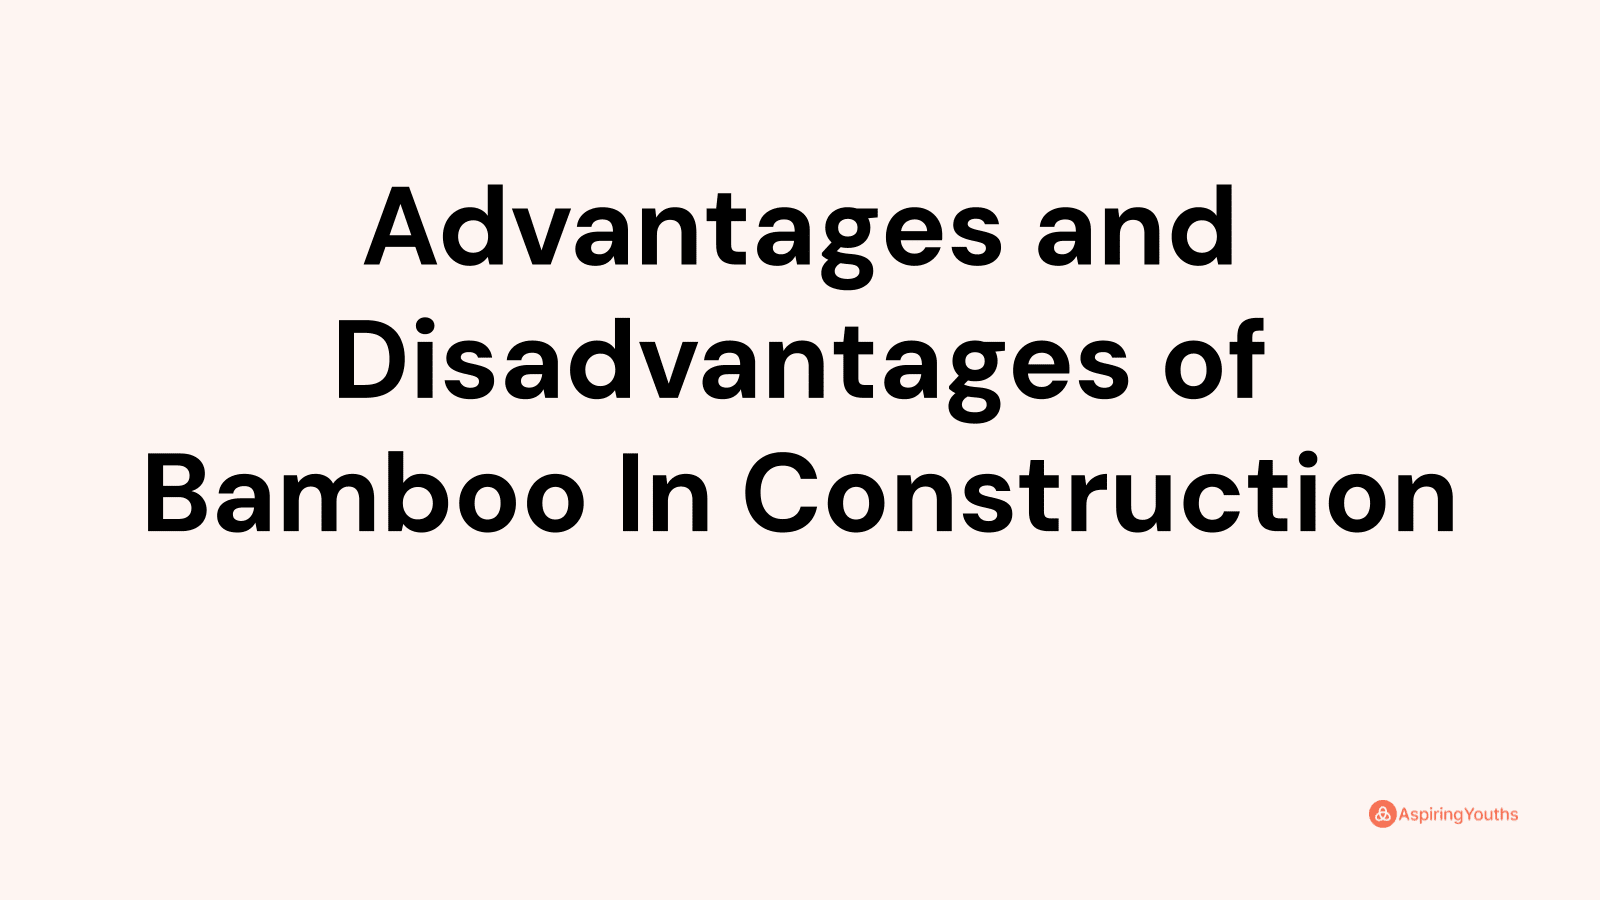 Advantages and disadvantages of Bamboo In Construction